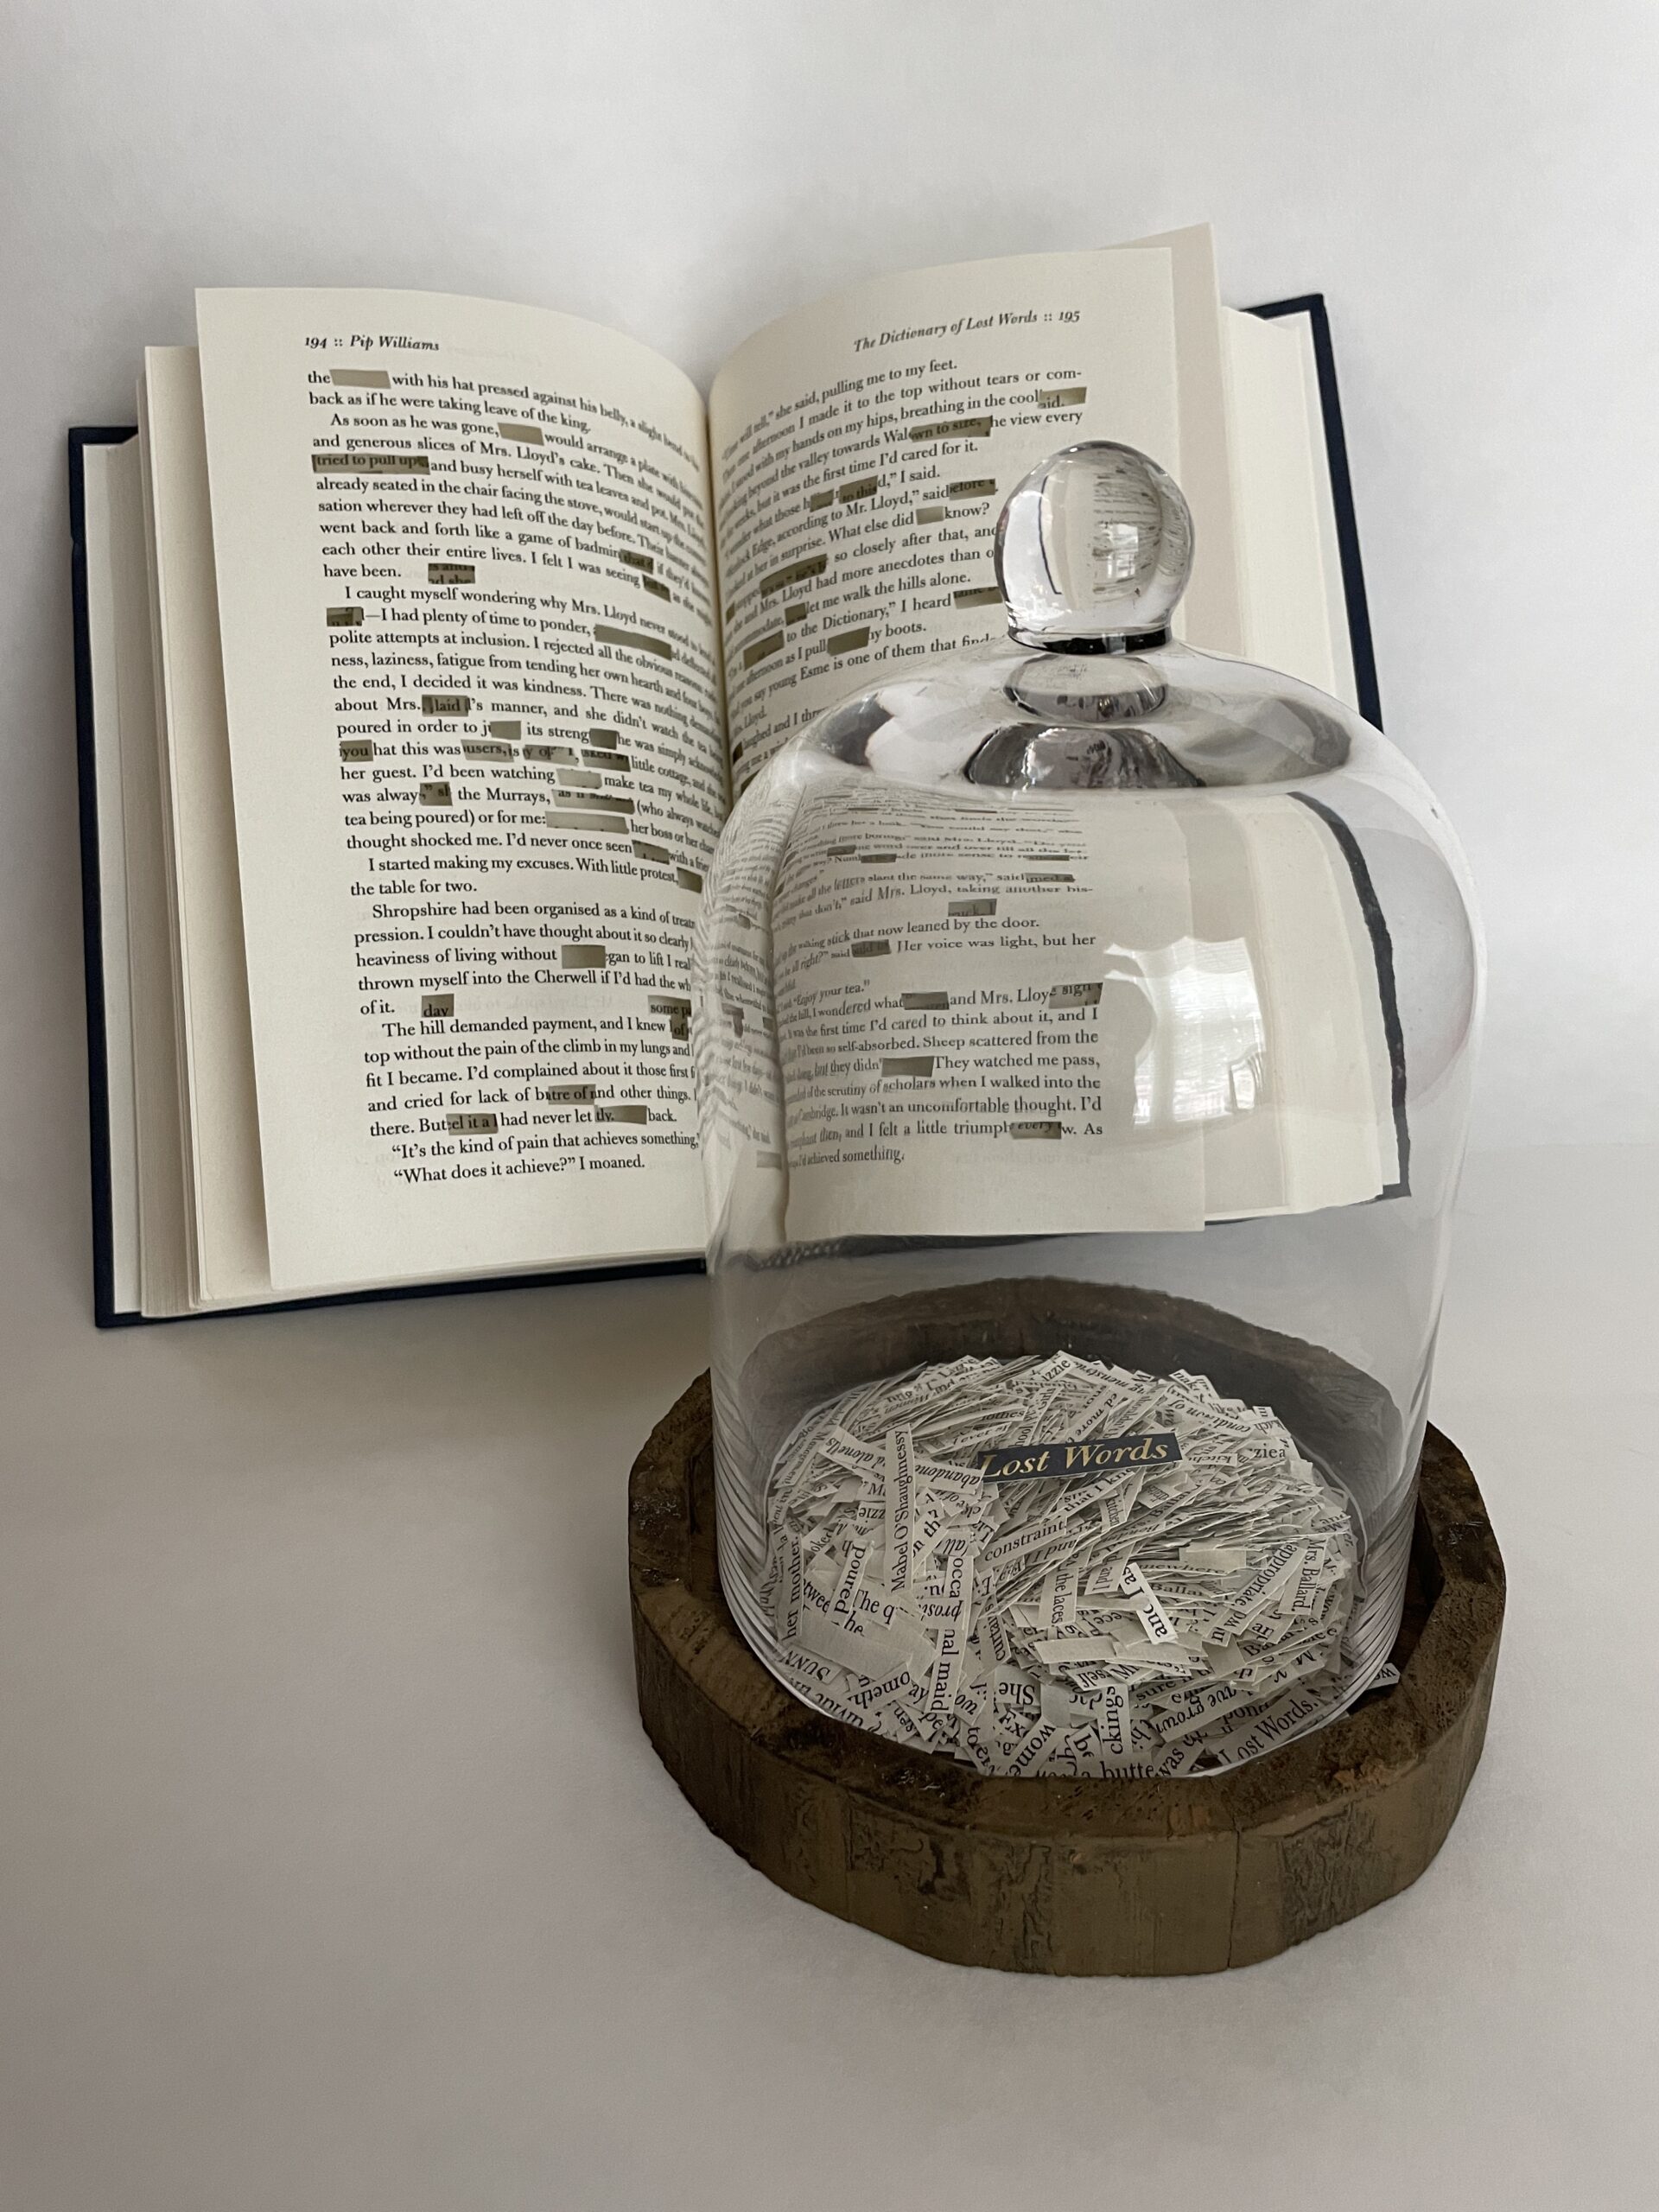 A book sculpture by Maggie Kerrigan that shows thousands of words cut out of the book The Dictionary of Lost Words.